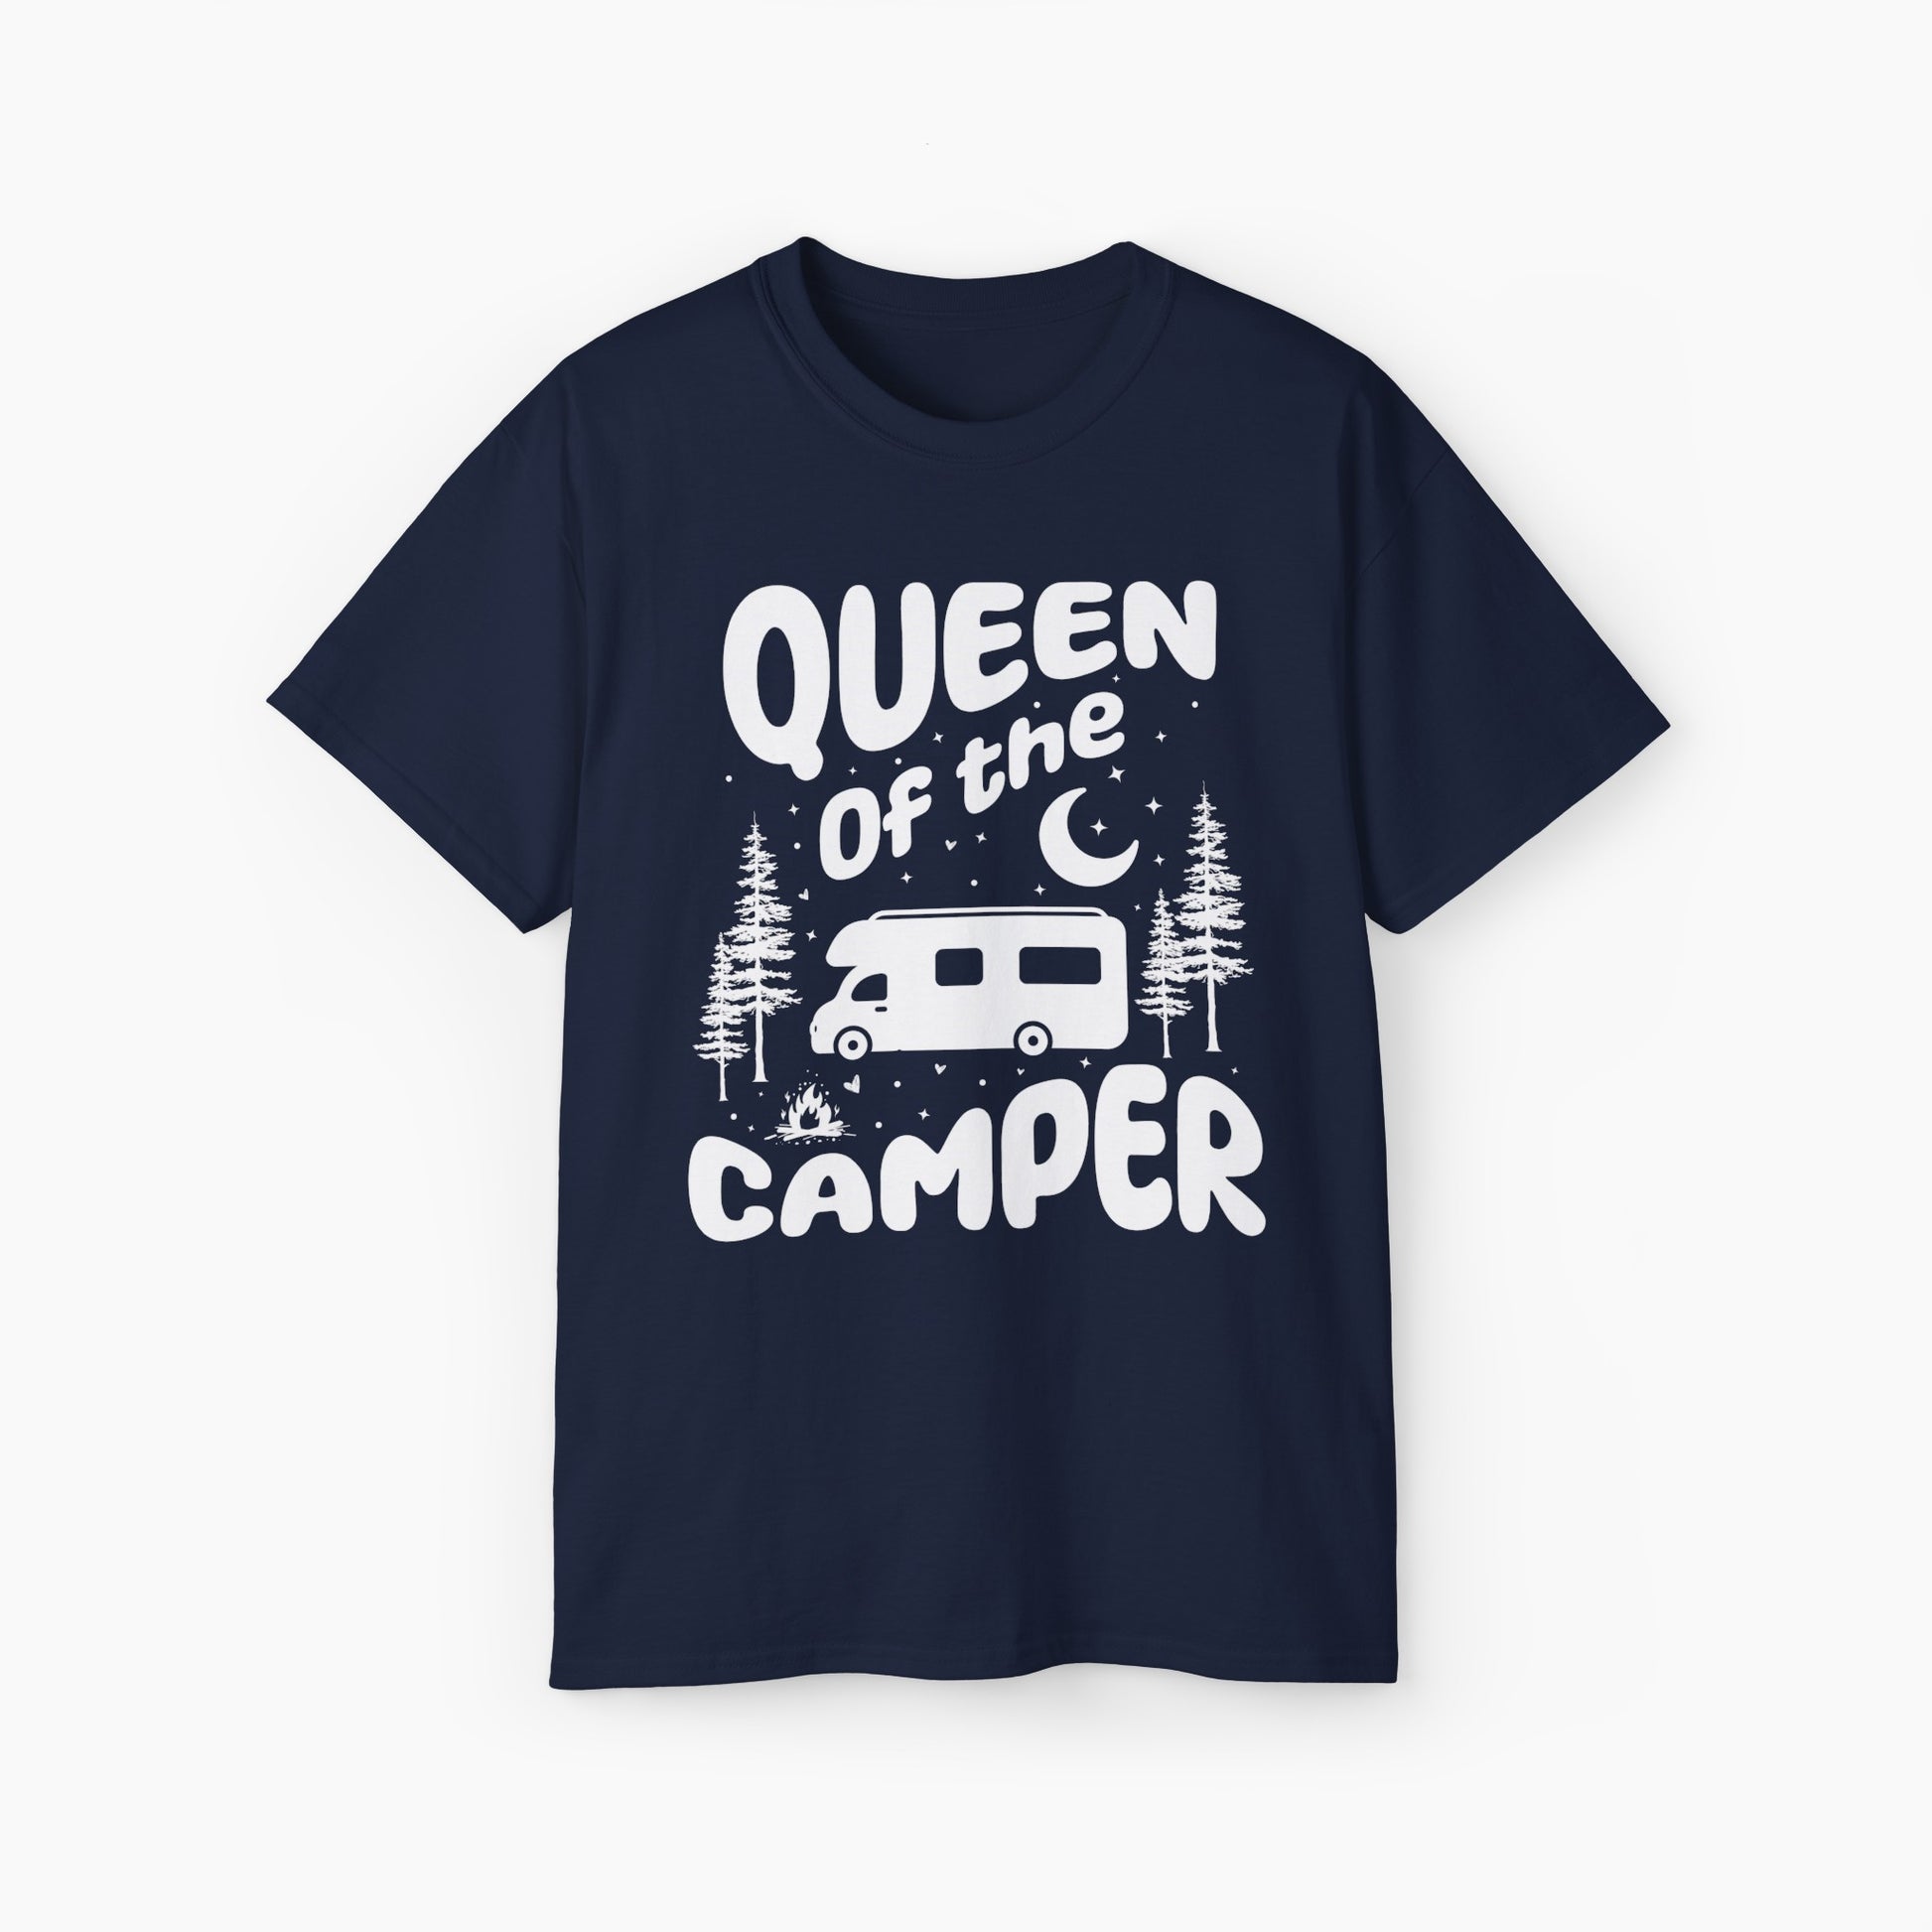 Dark blue t-shirt with 'Camping Queen' text, illustrated with a camping van, stars, trees, campfire, and moon, on a plain background.